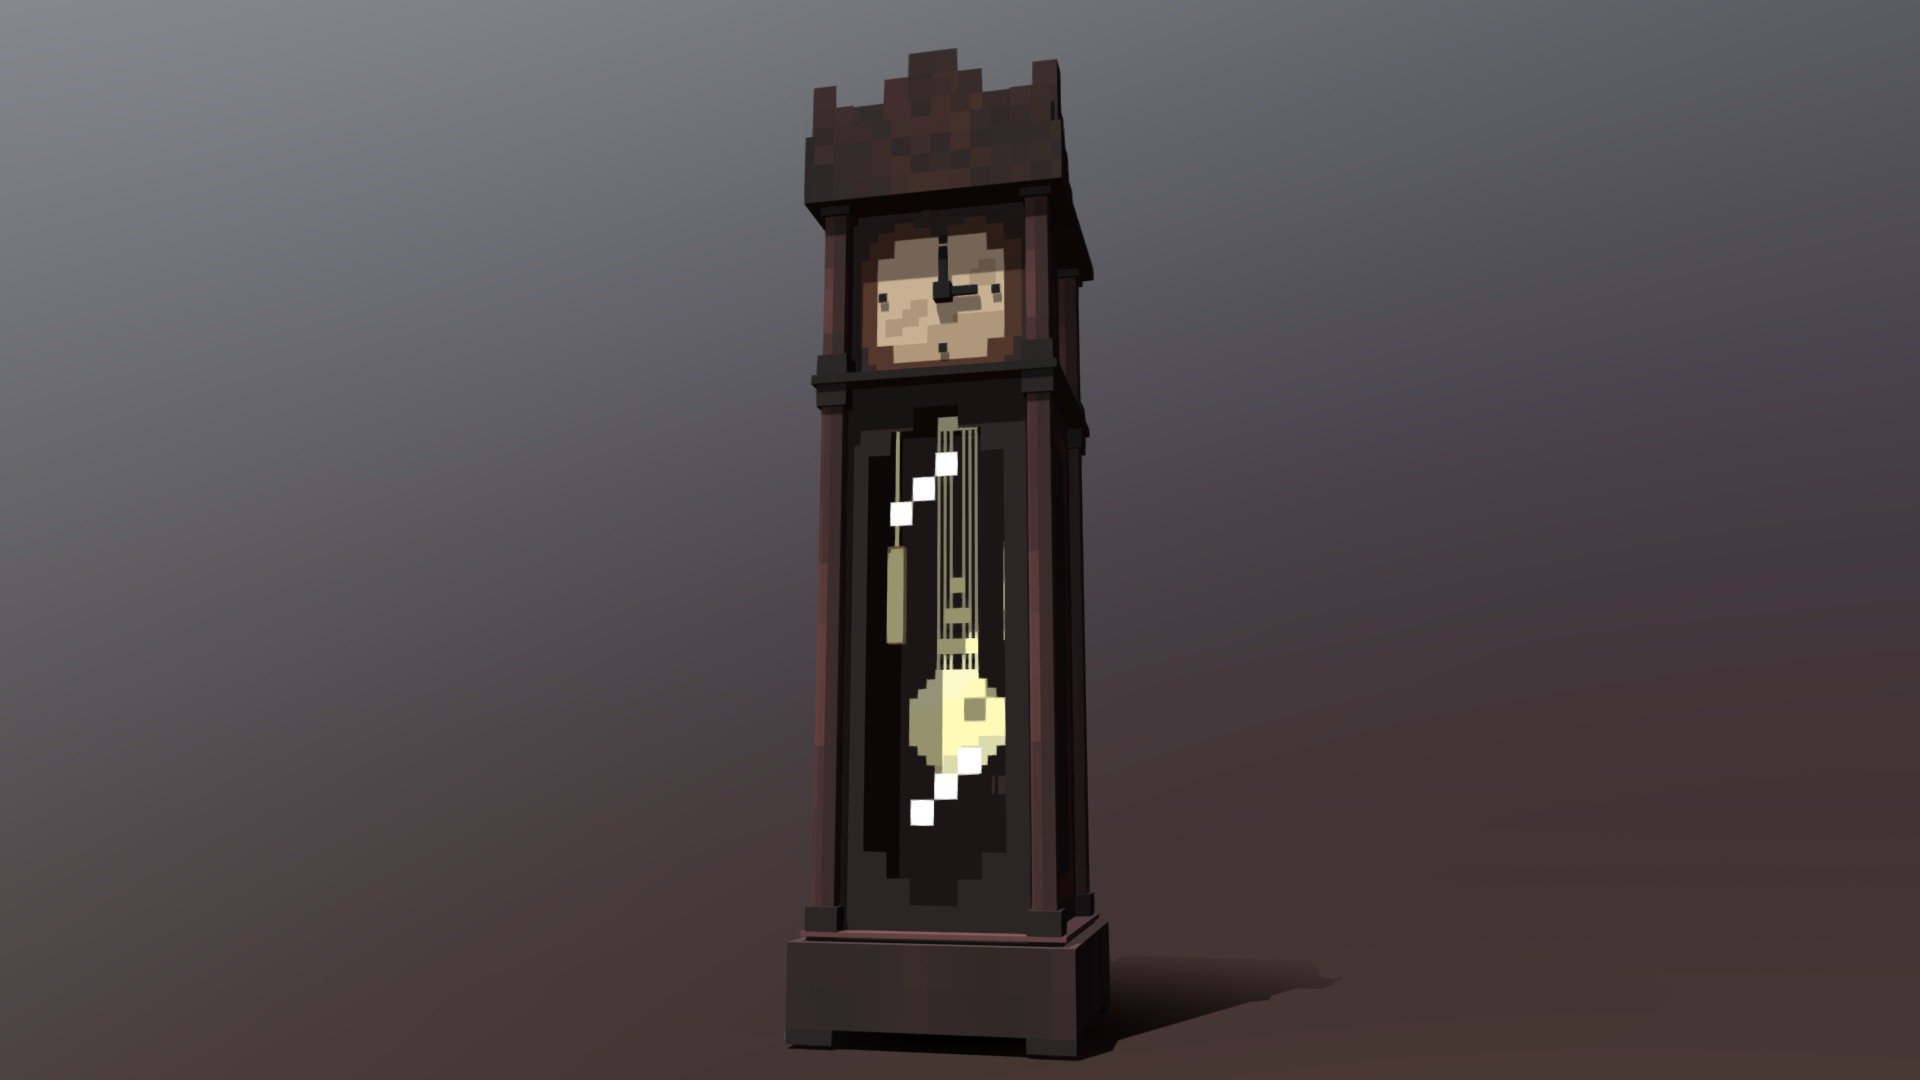 A grandfather clock to always keep up with the times. 
(If you see what I did there.)

Here we can see 2 types of animation working together in harmony 3d model